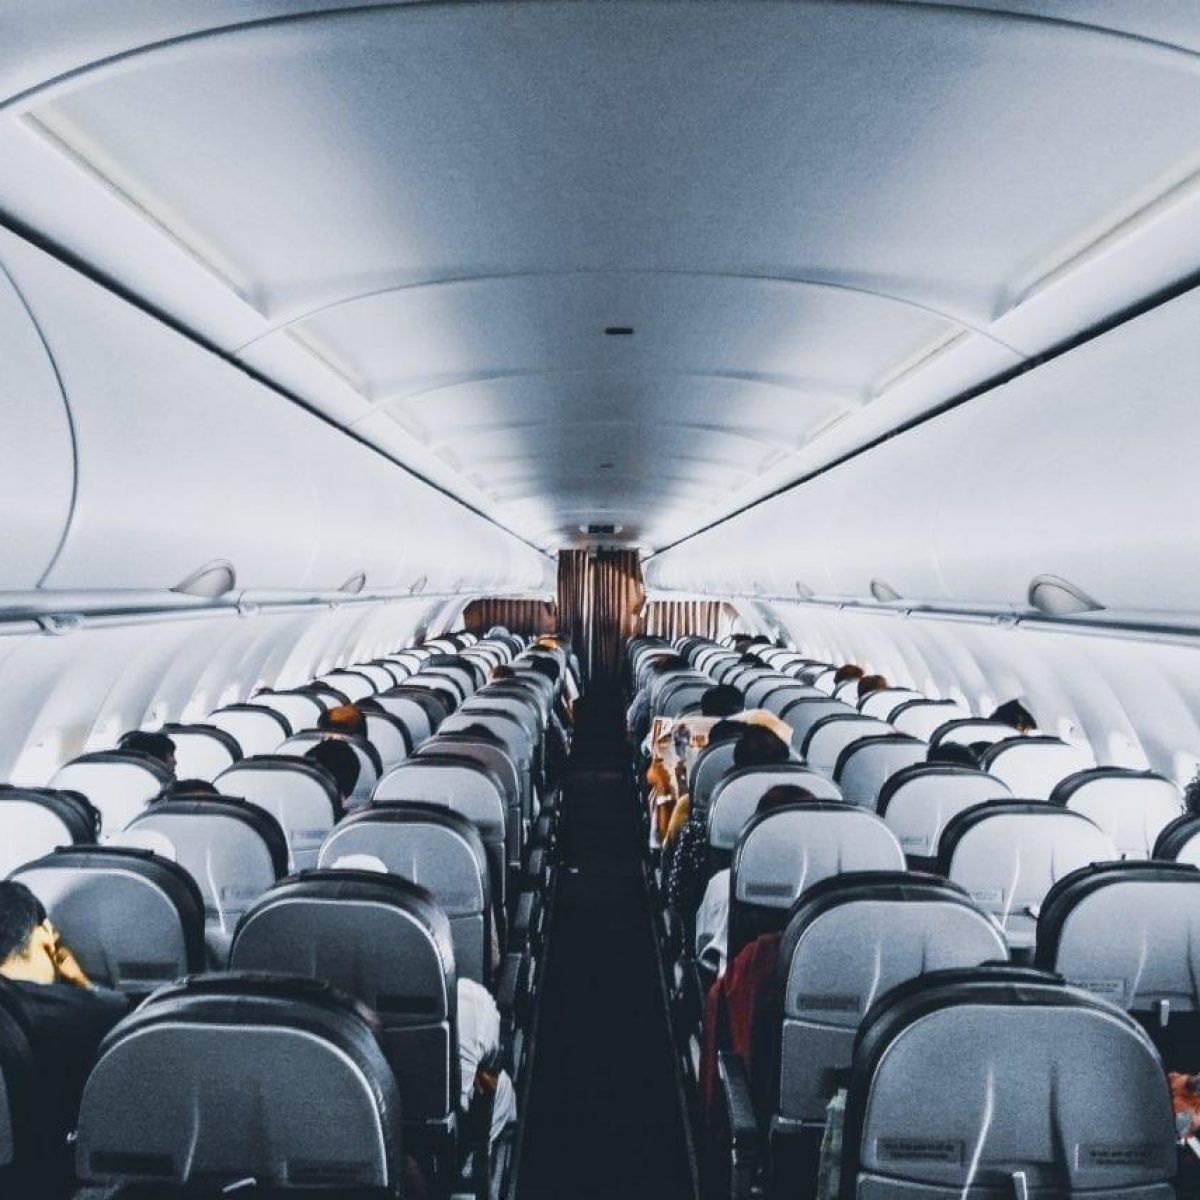 A plane with many open seats